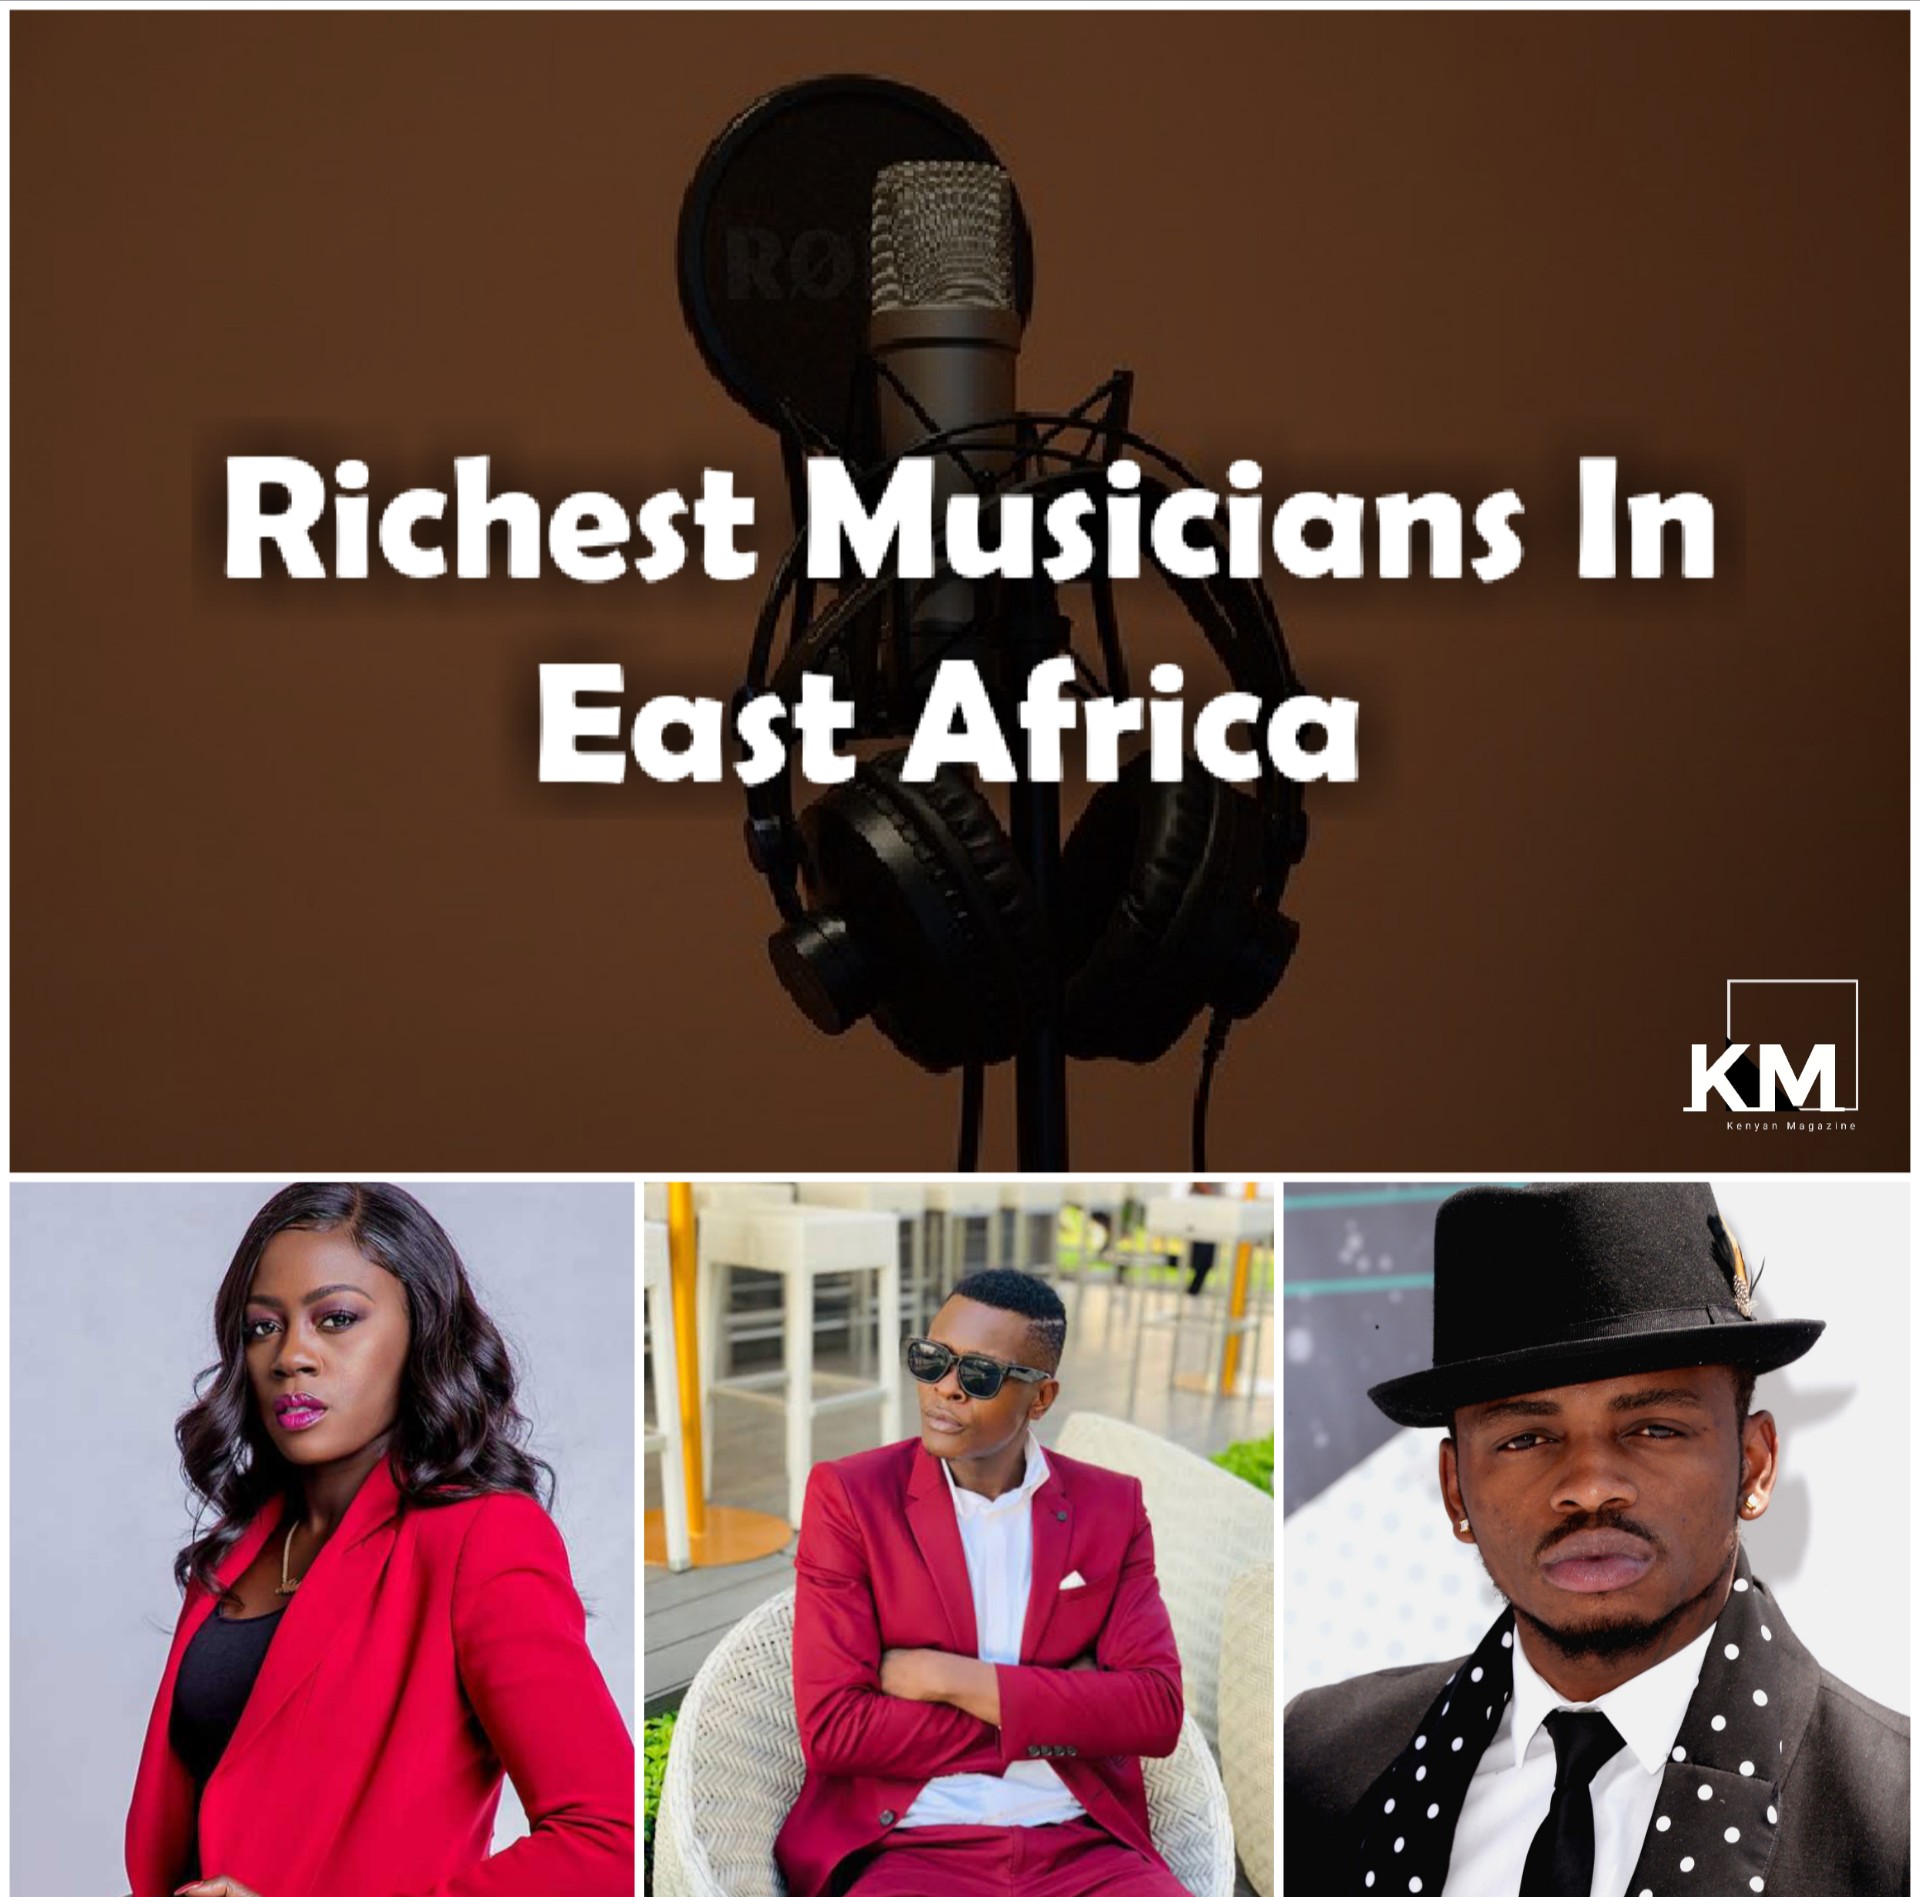 Richest Musicians In East Africa